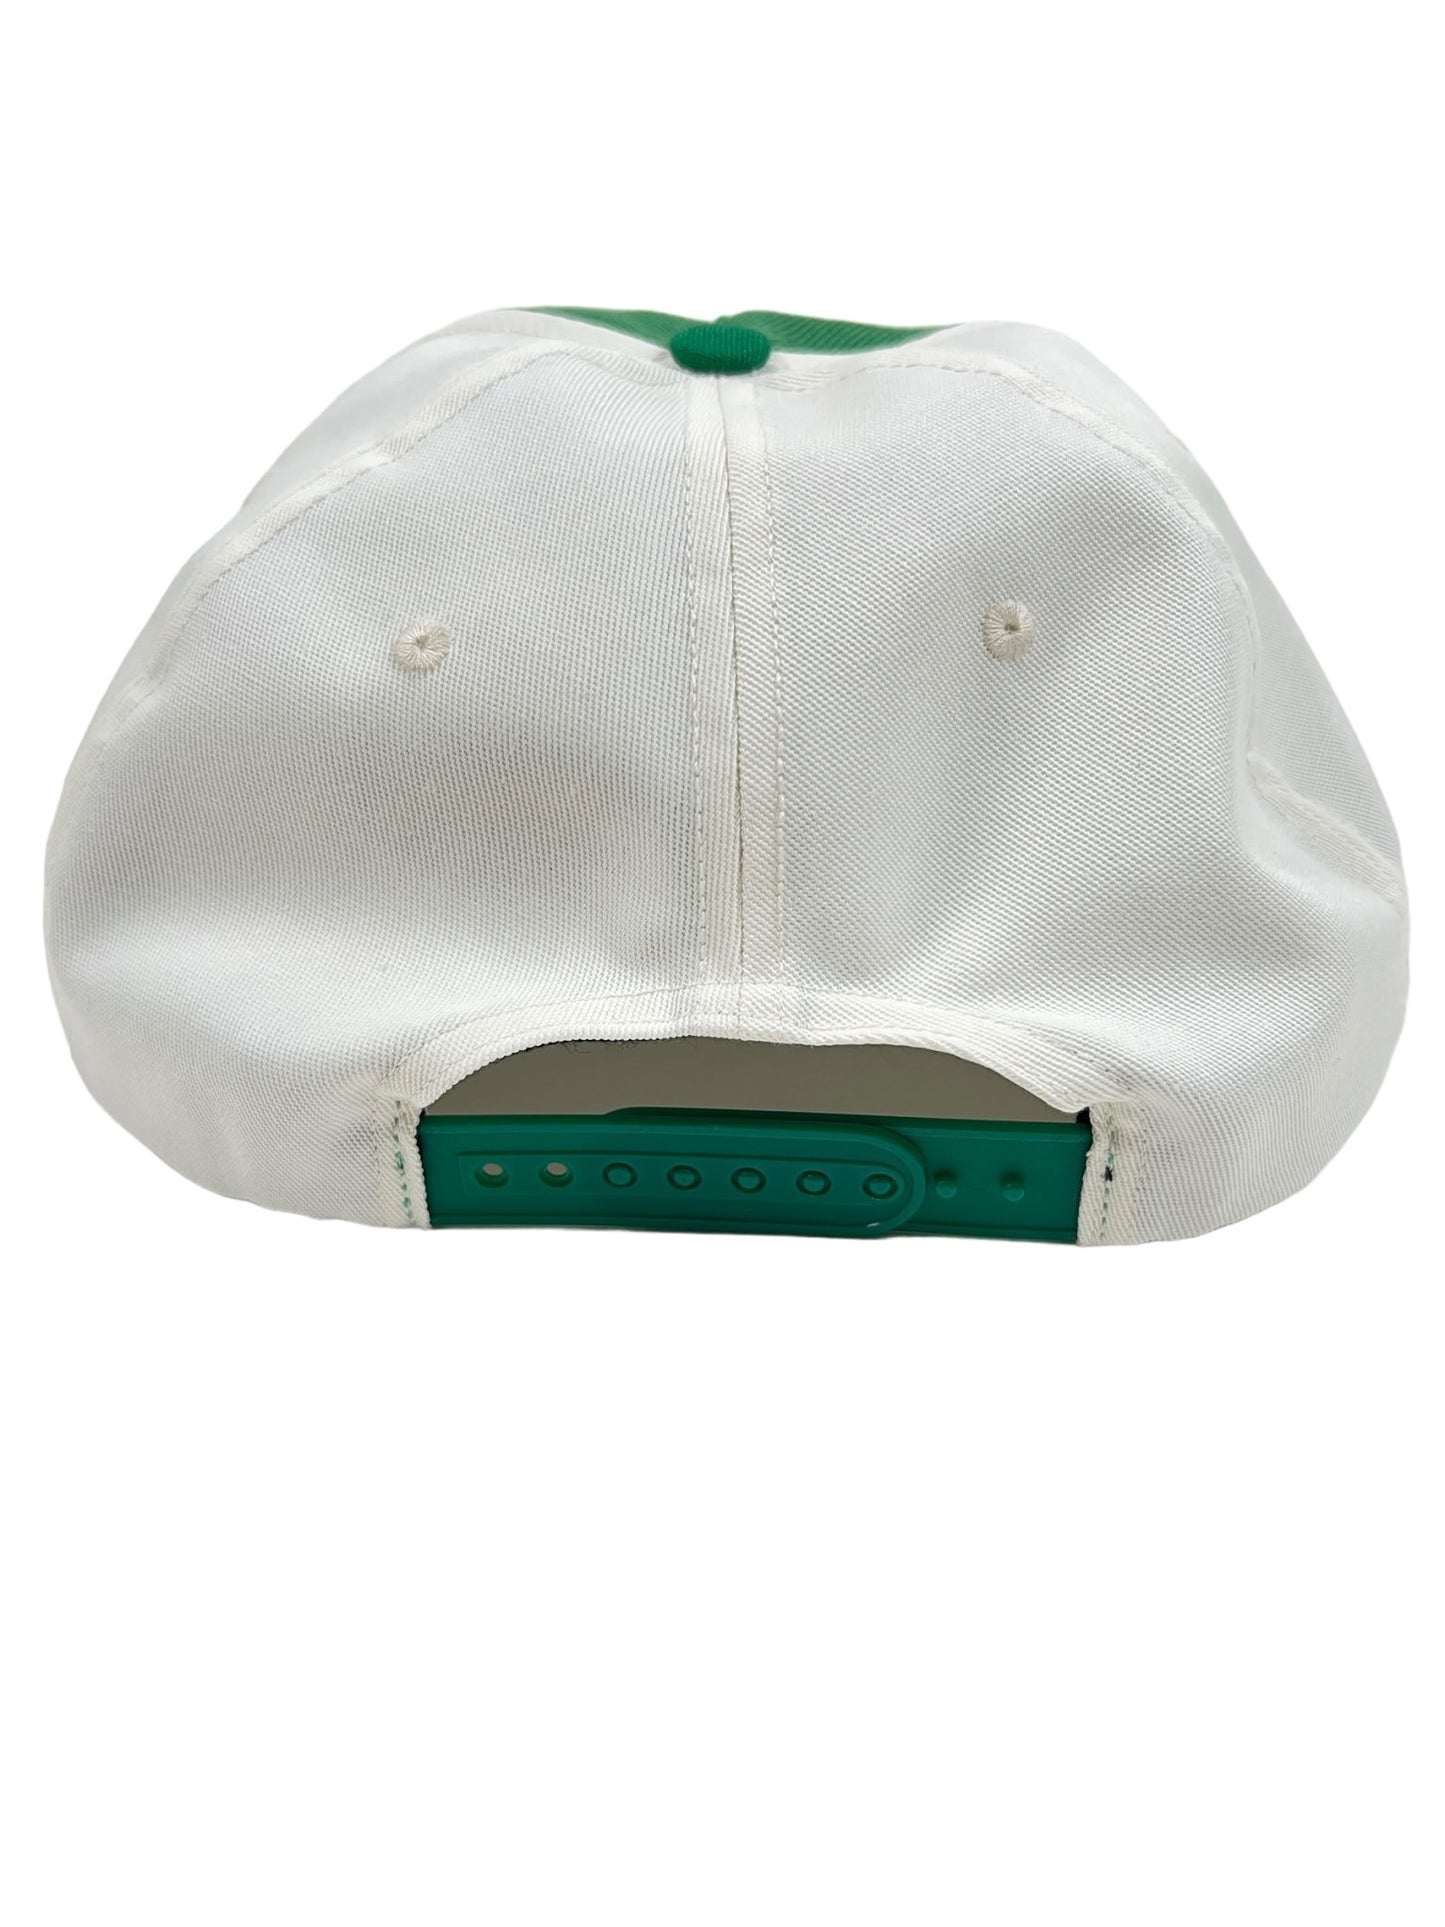 A minimalist design RHUDE BEACH CLUB HAT GRN, white and green, crafted from high-quality materials, displayed against a white background.